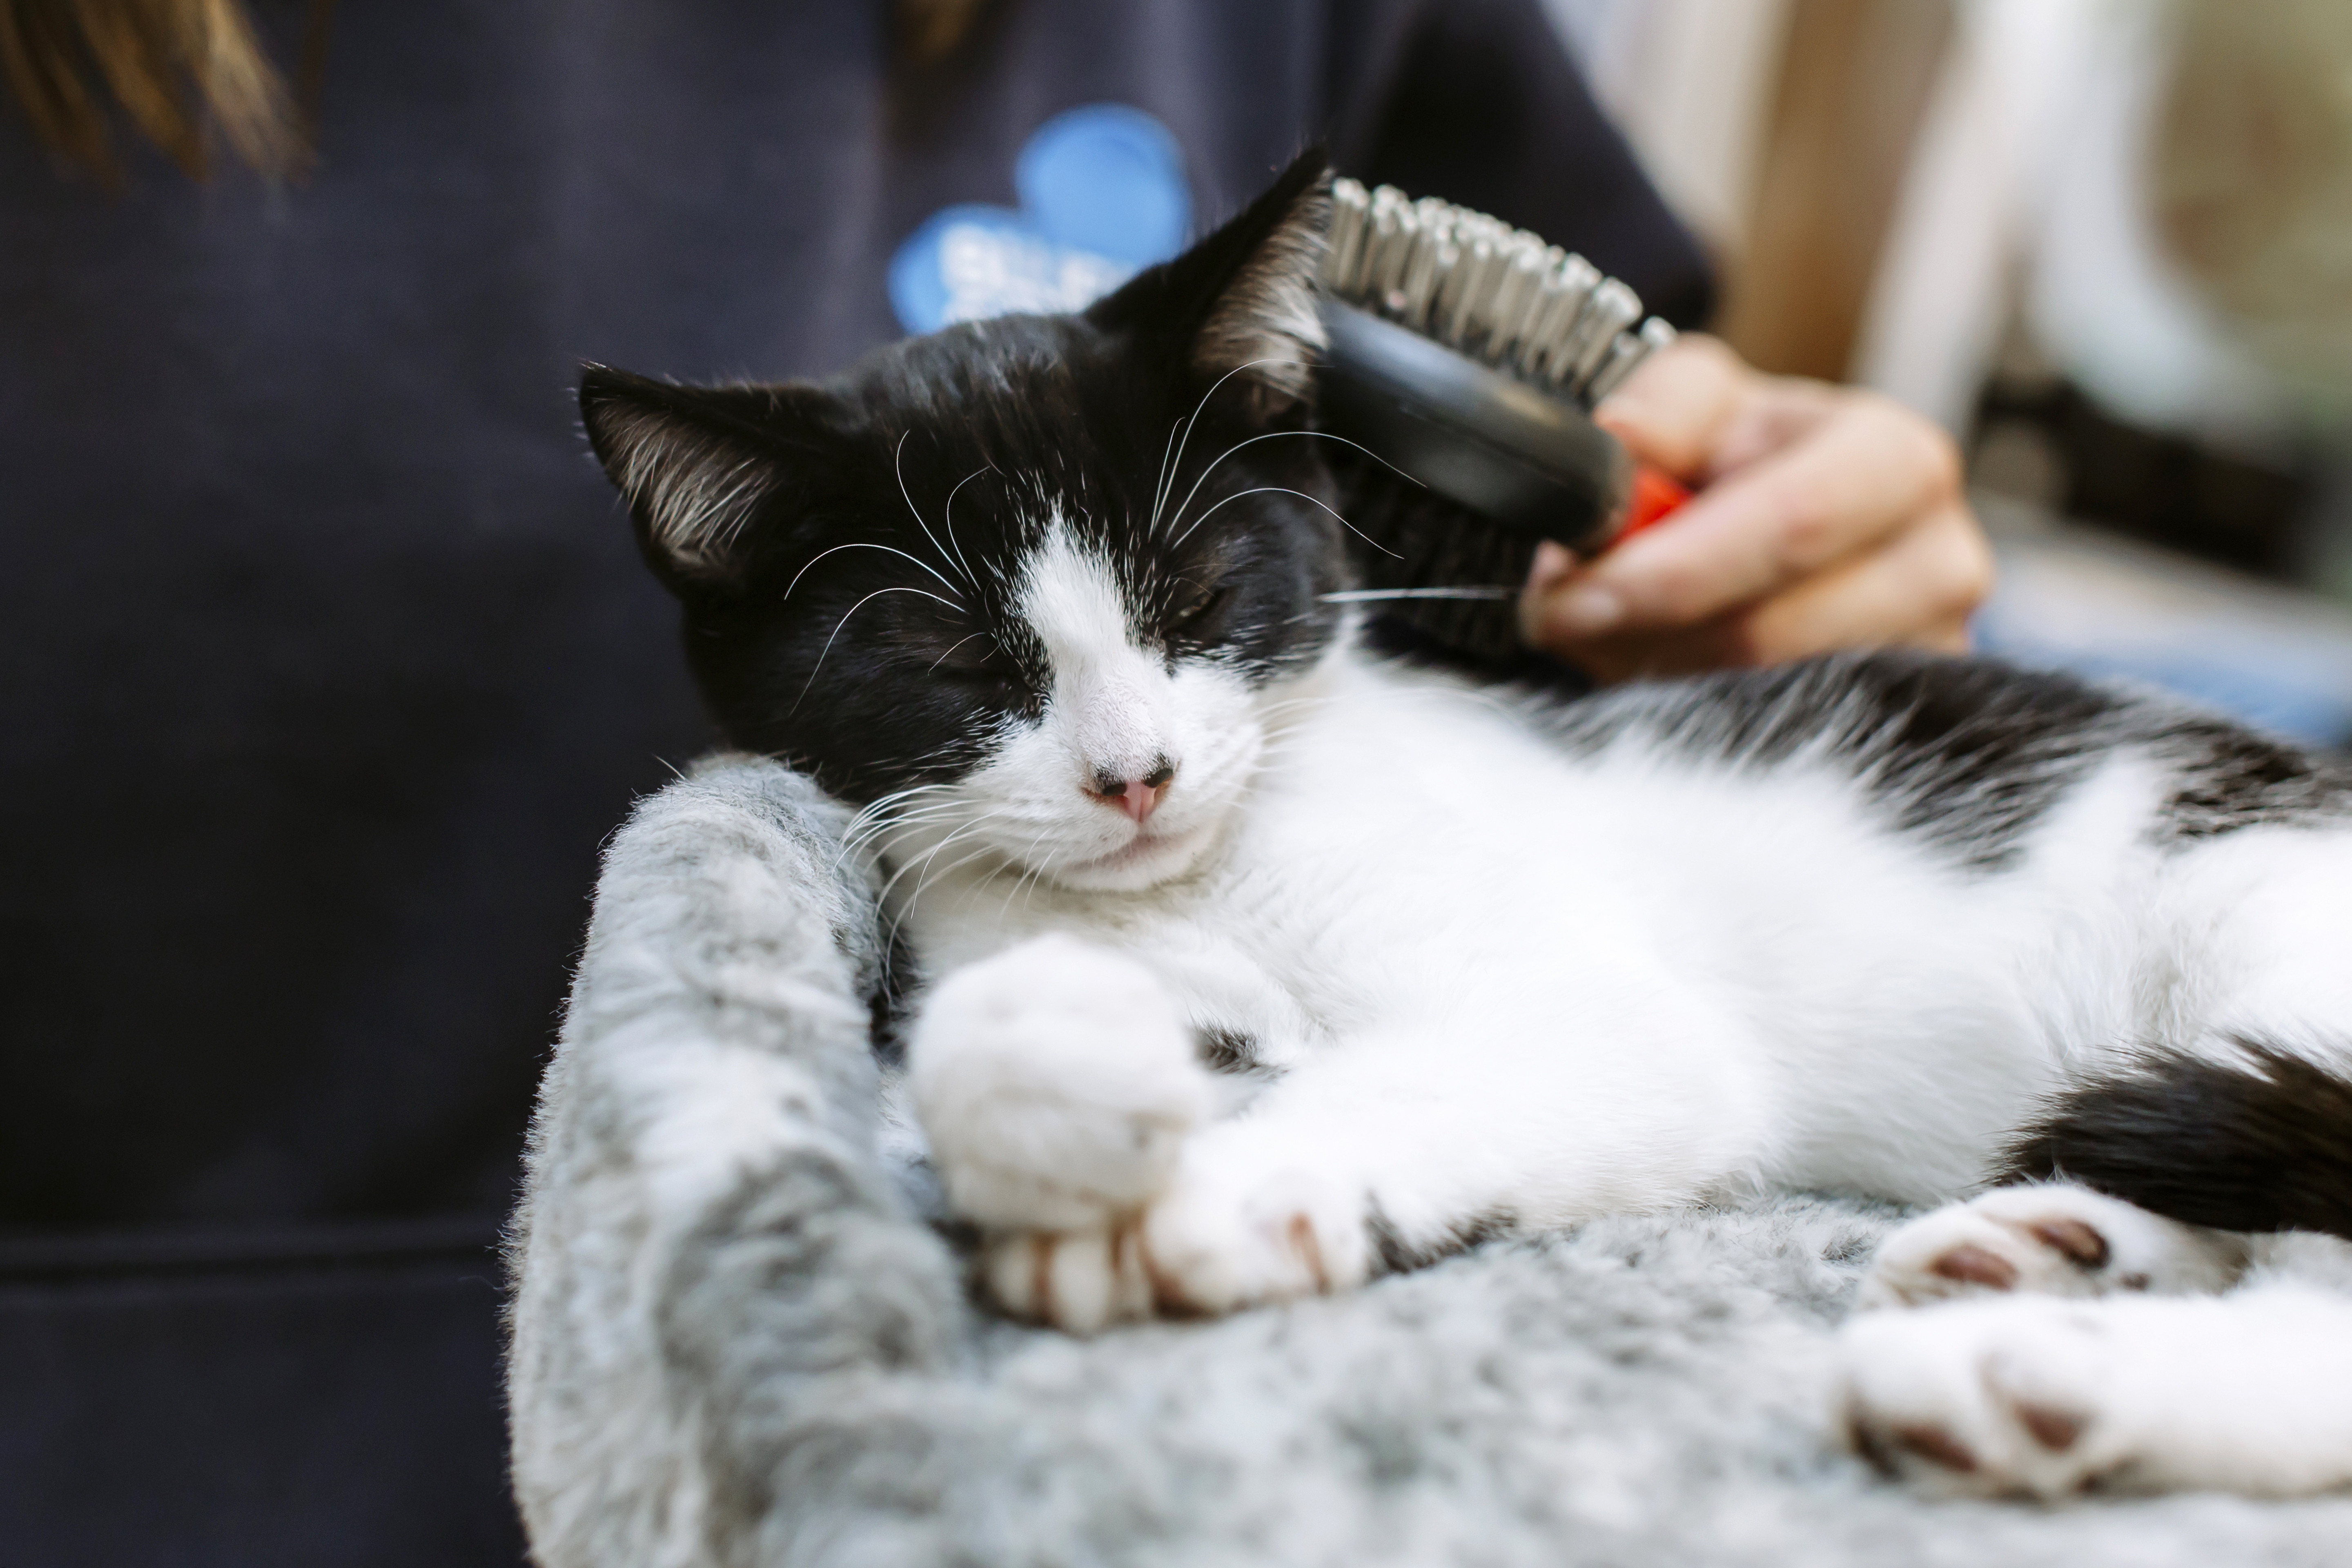 A black and white cat enjoys being groomed by a Blue Cross staff member.